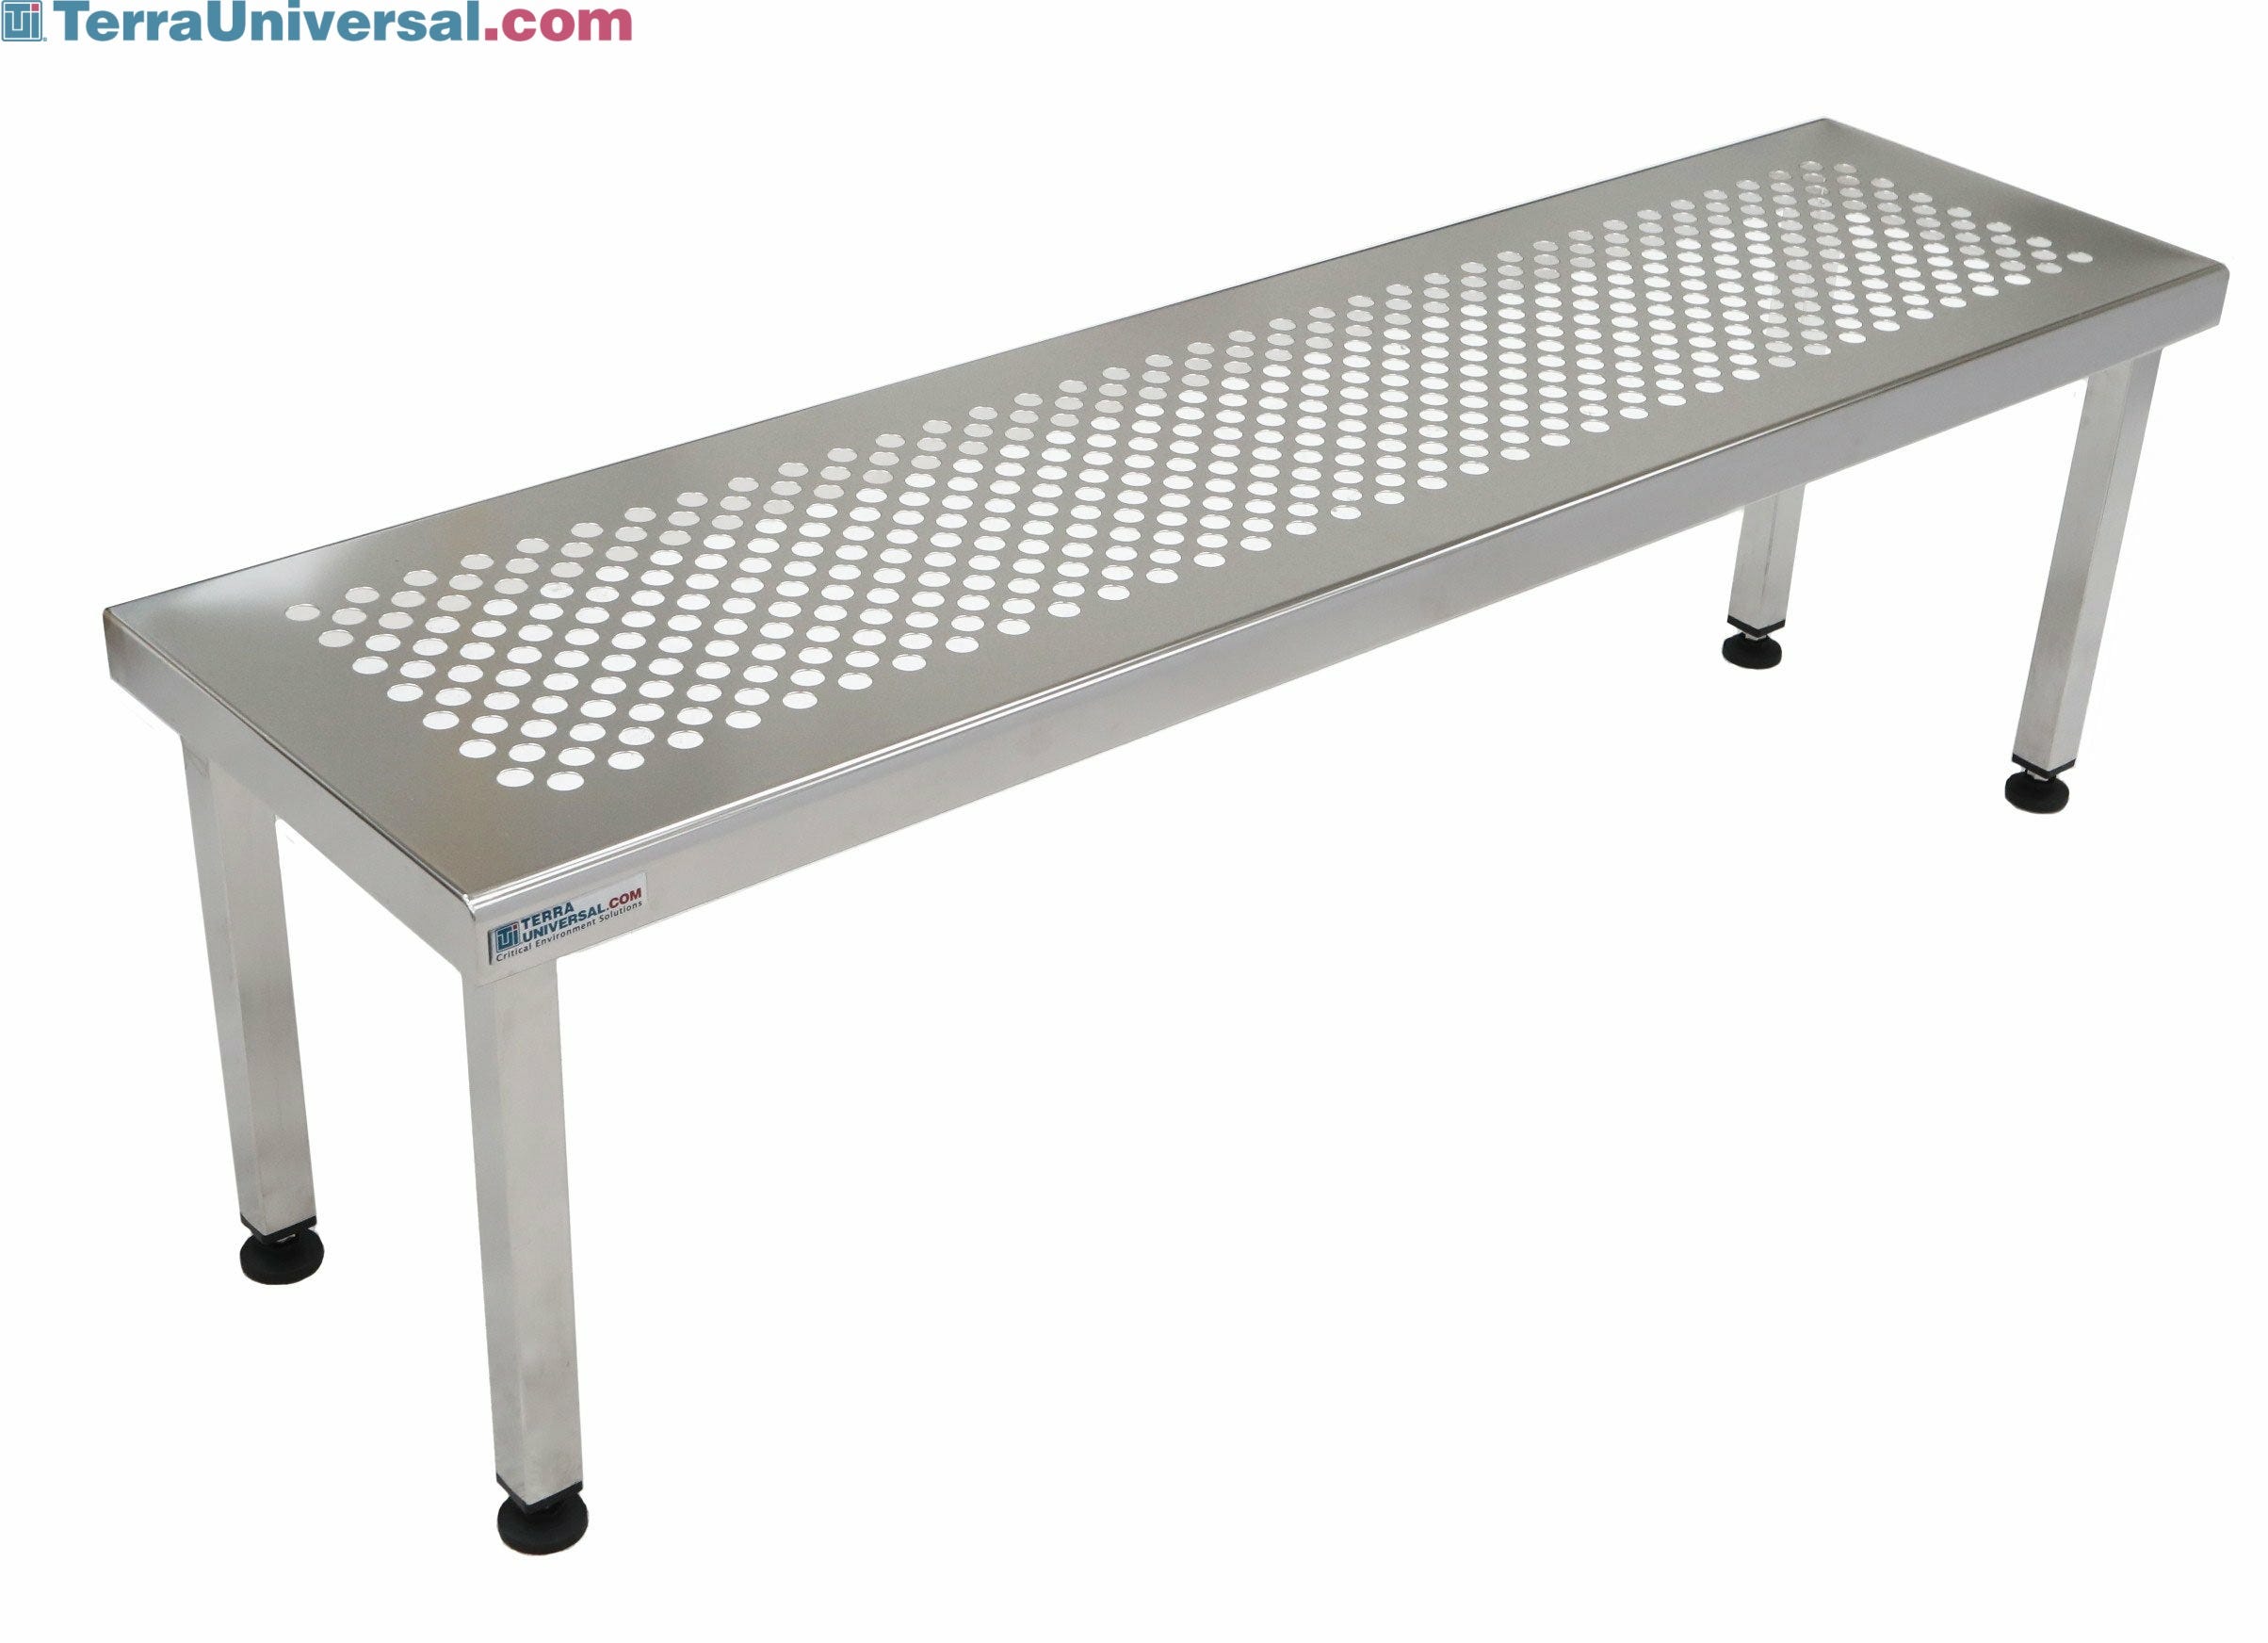 Gowning Room Furniture | Cleanroom Furniture | Gowning Room